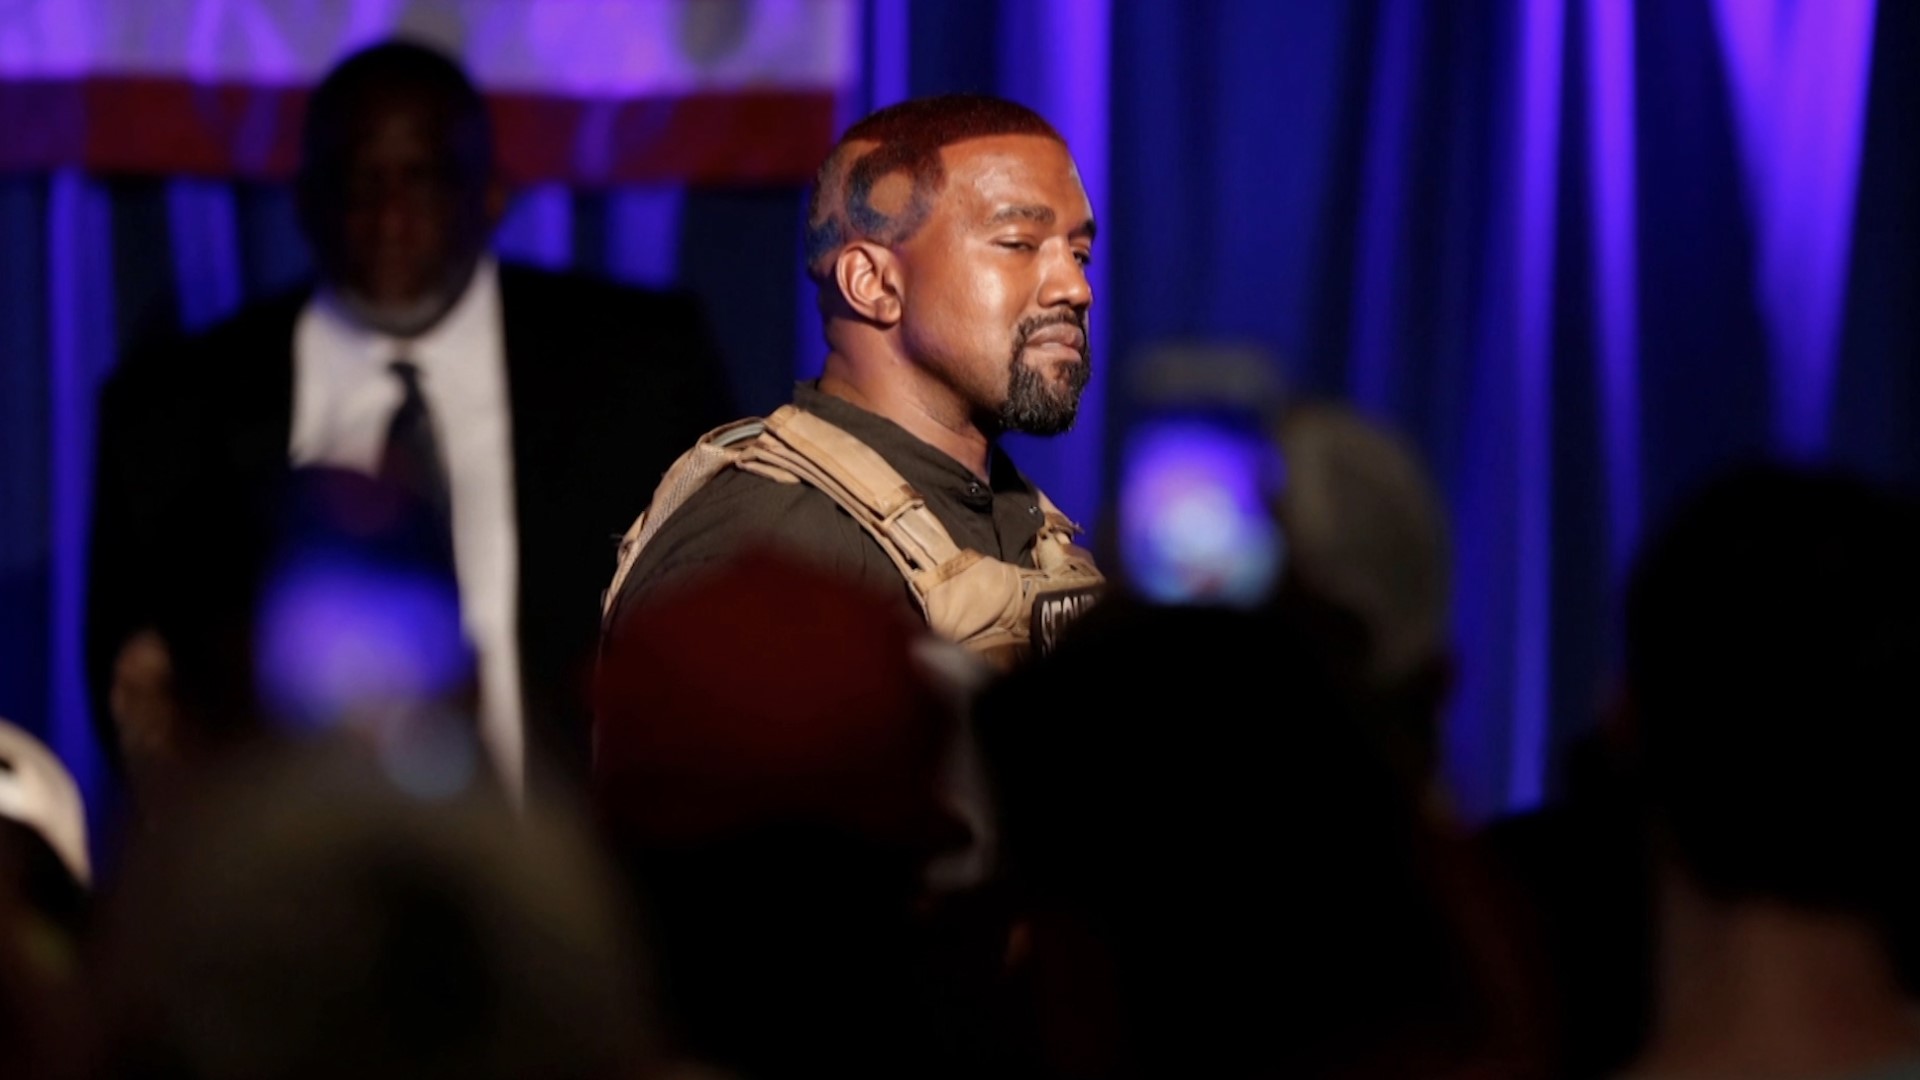 A late presidential bid by Kanye West sees him attract a mere two percent of voters in a national poll. Veuer's Justin Kircher has more.